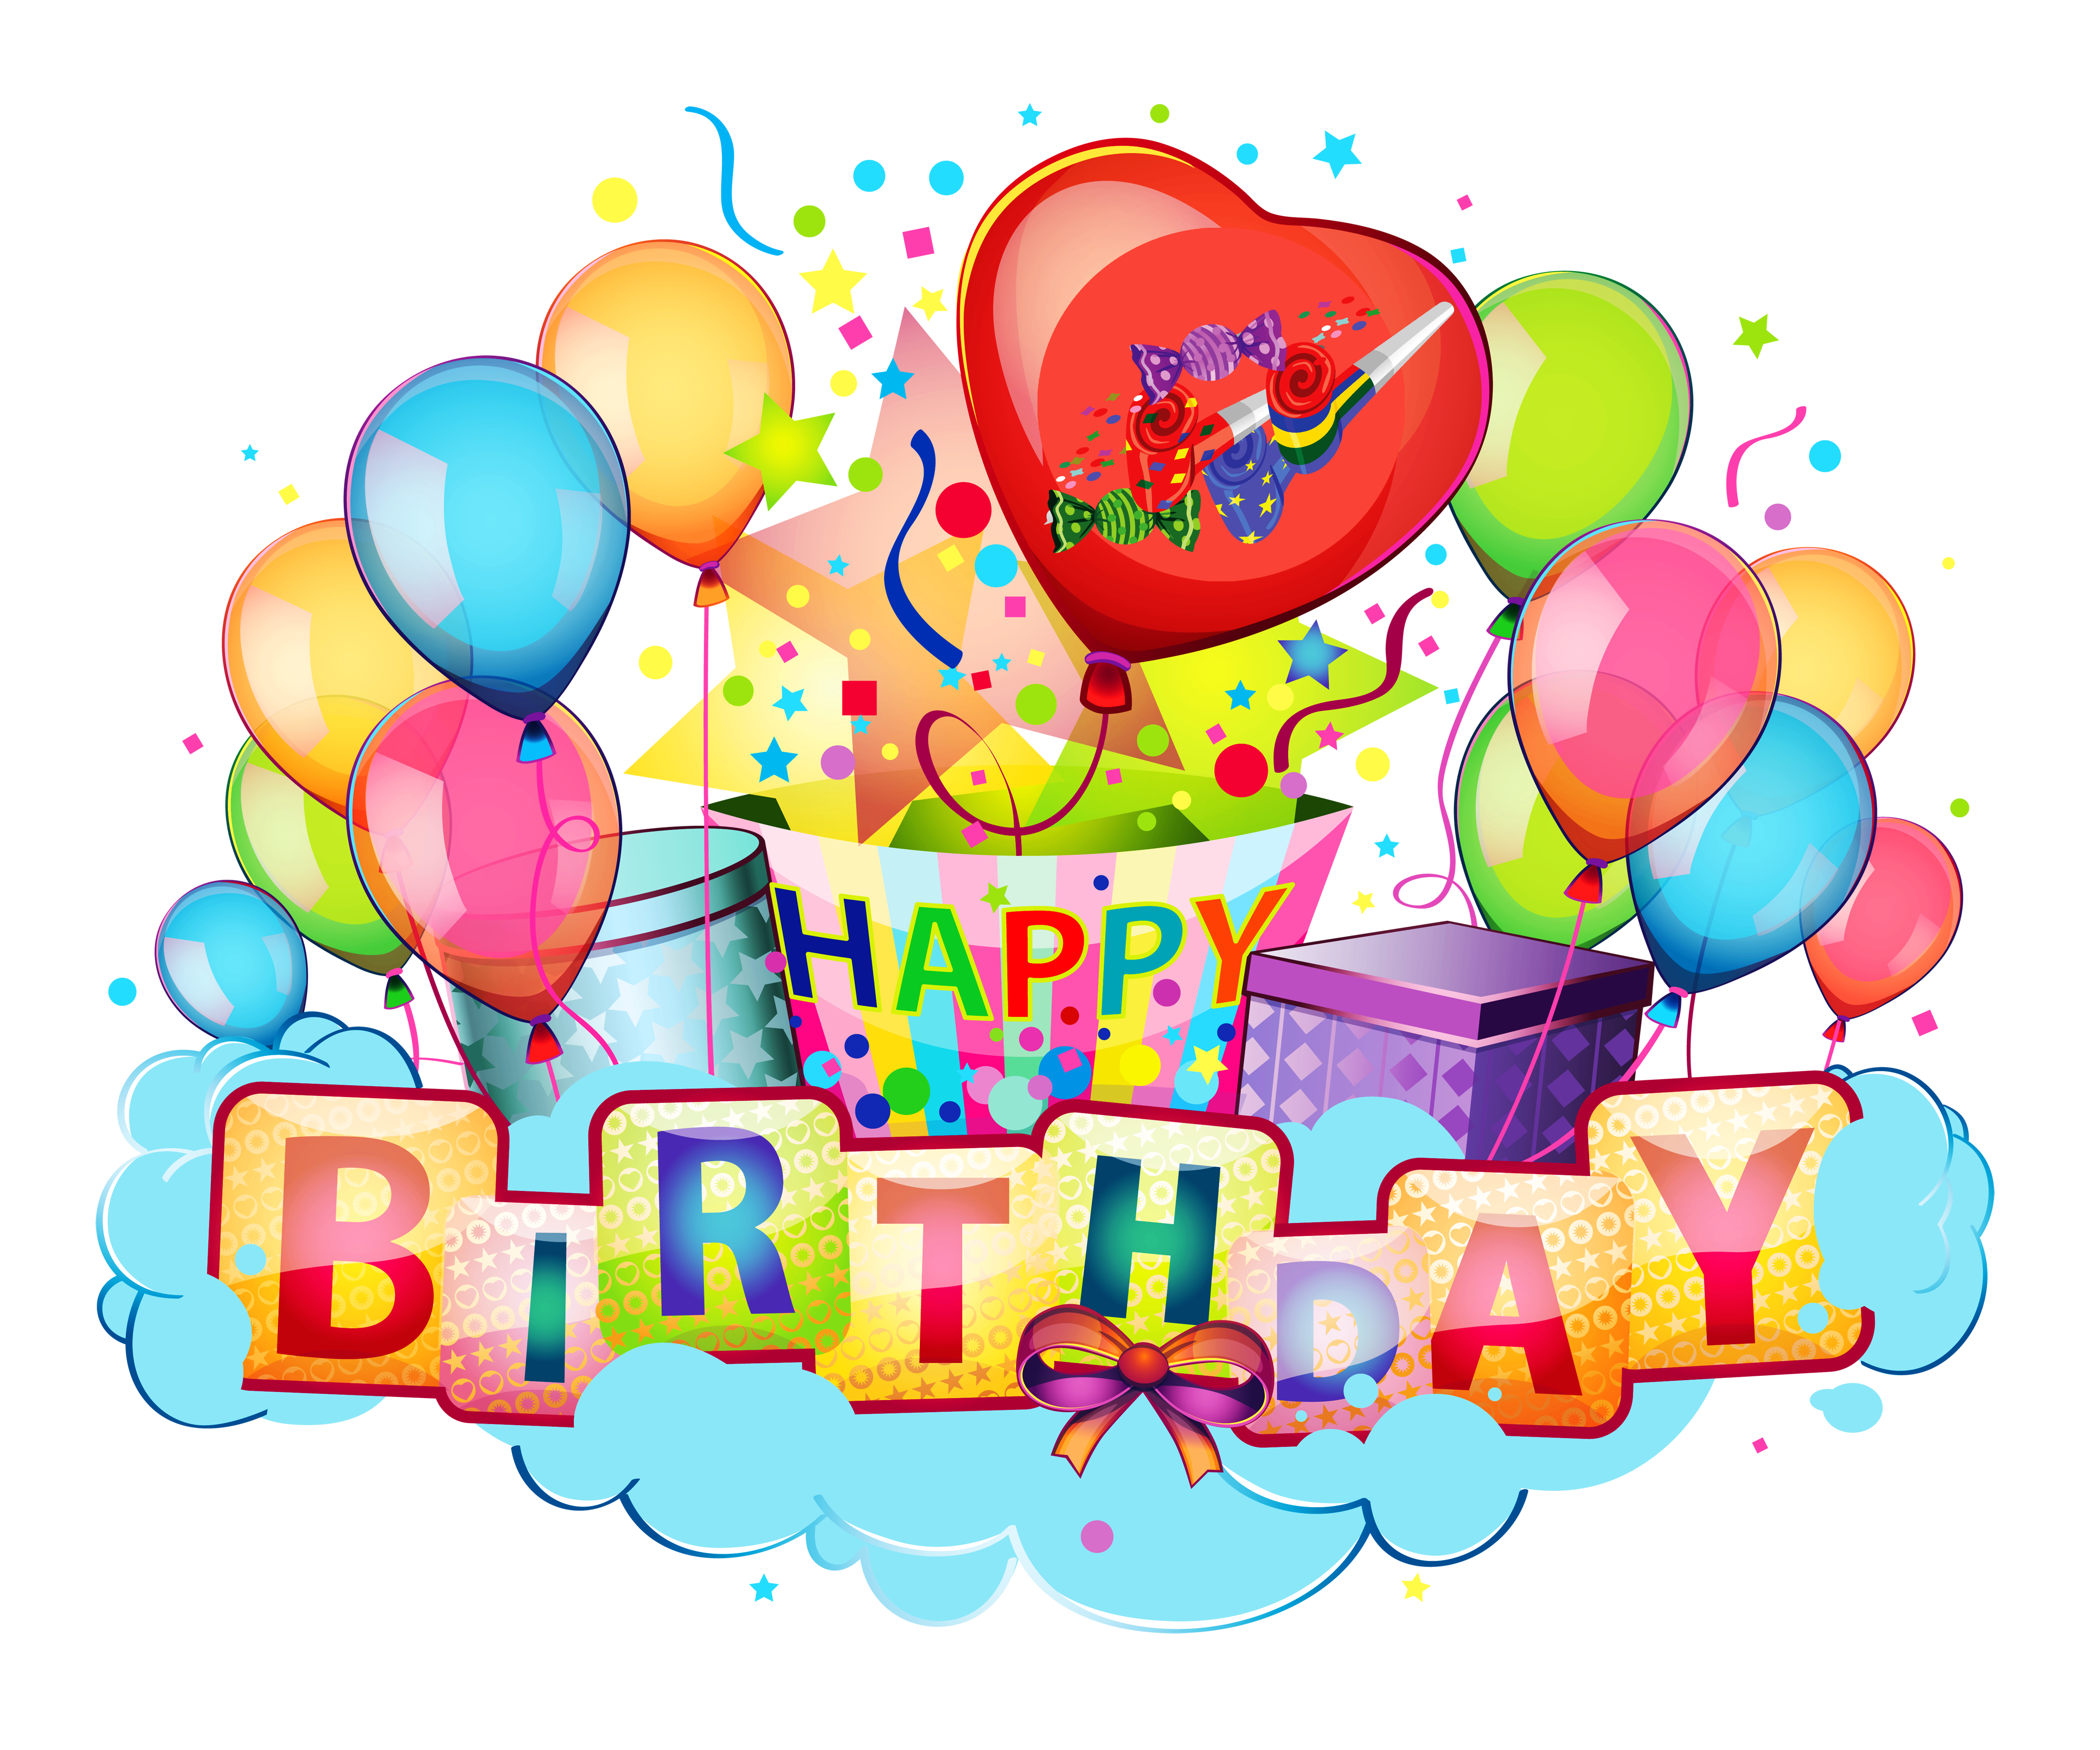 Picture #1155803 - frames clipart happy birthday. frames clipart happy birt...